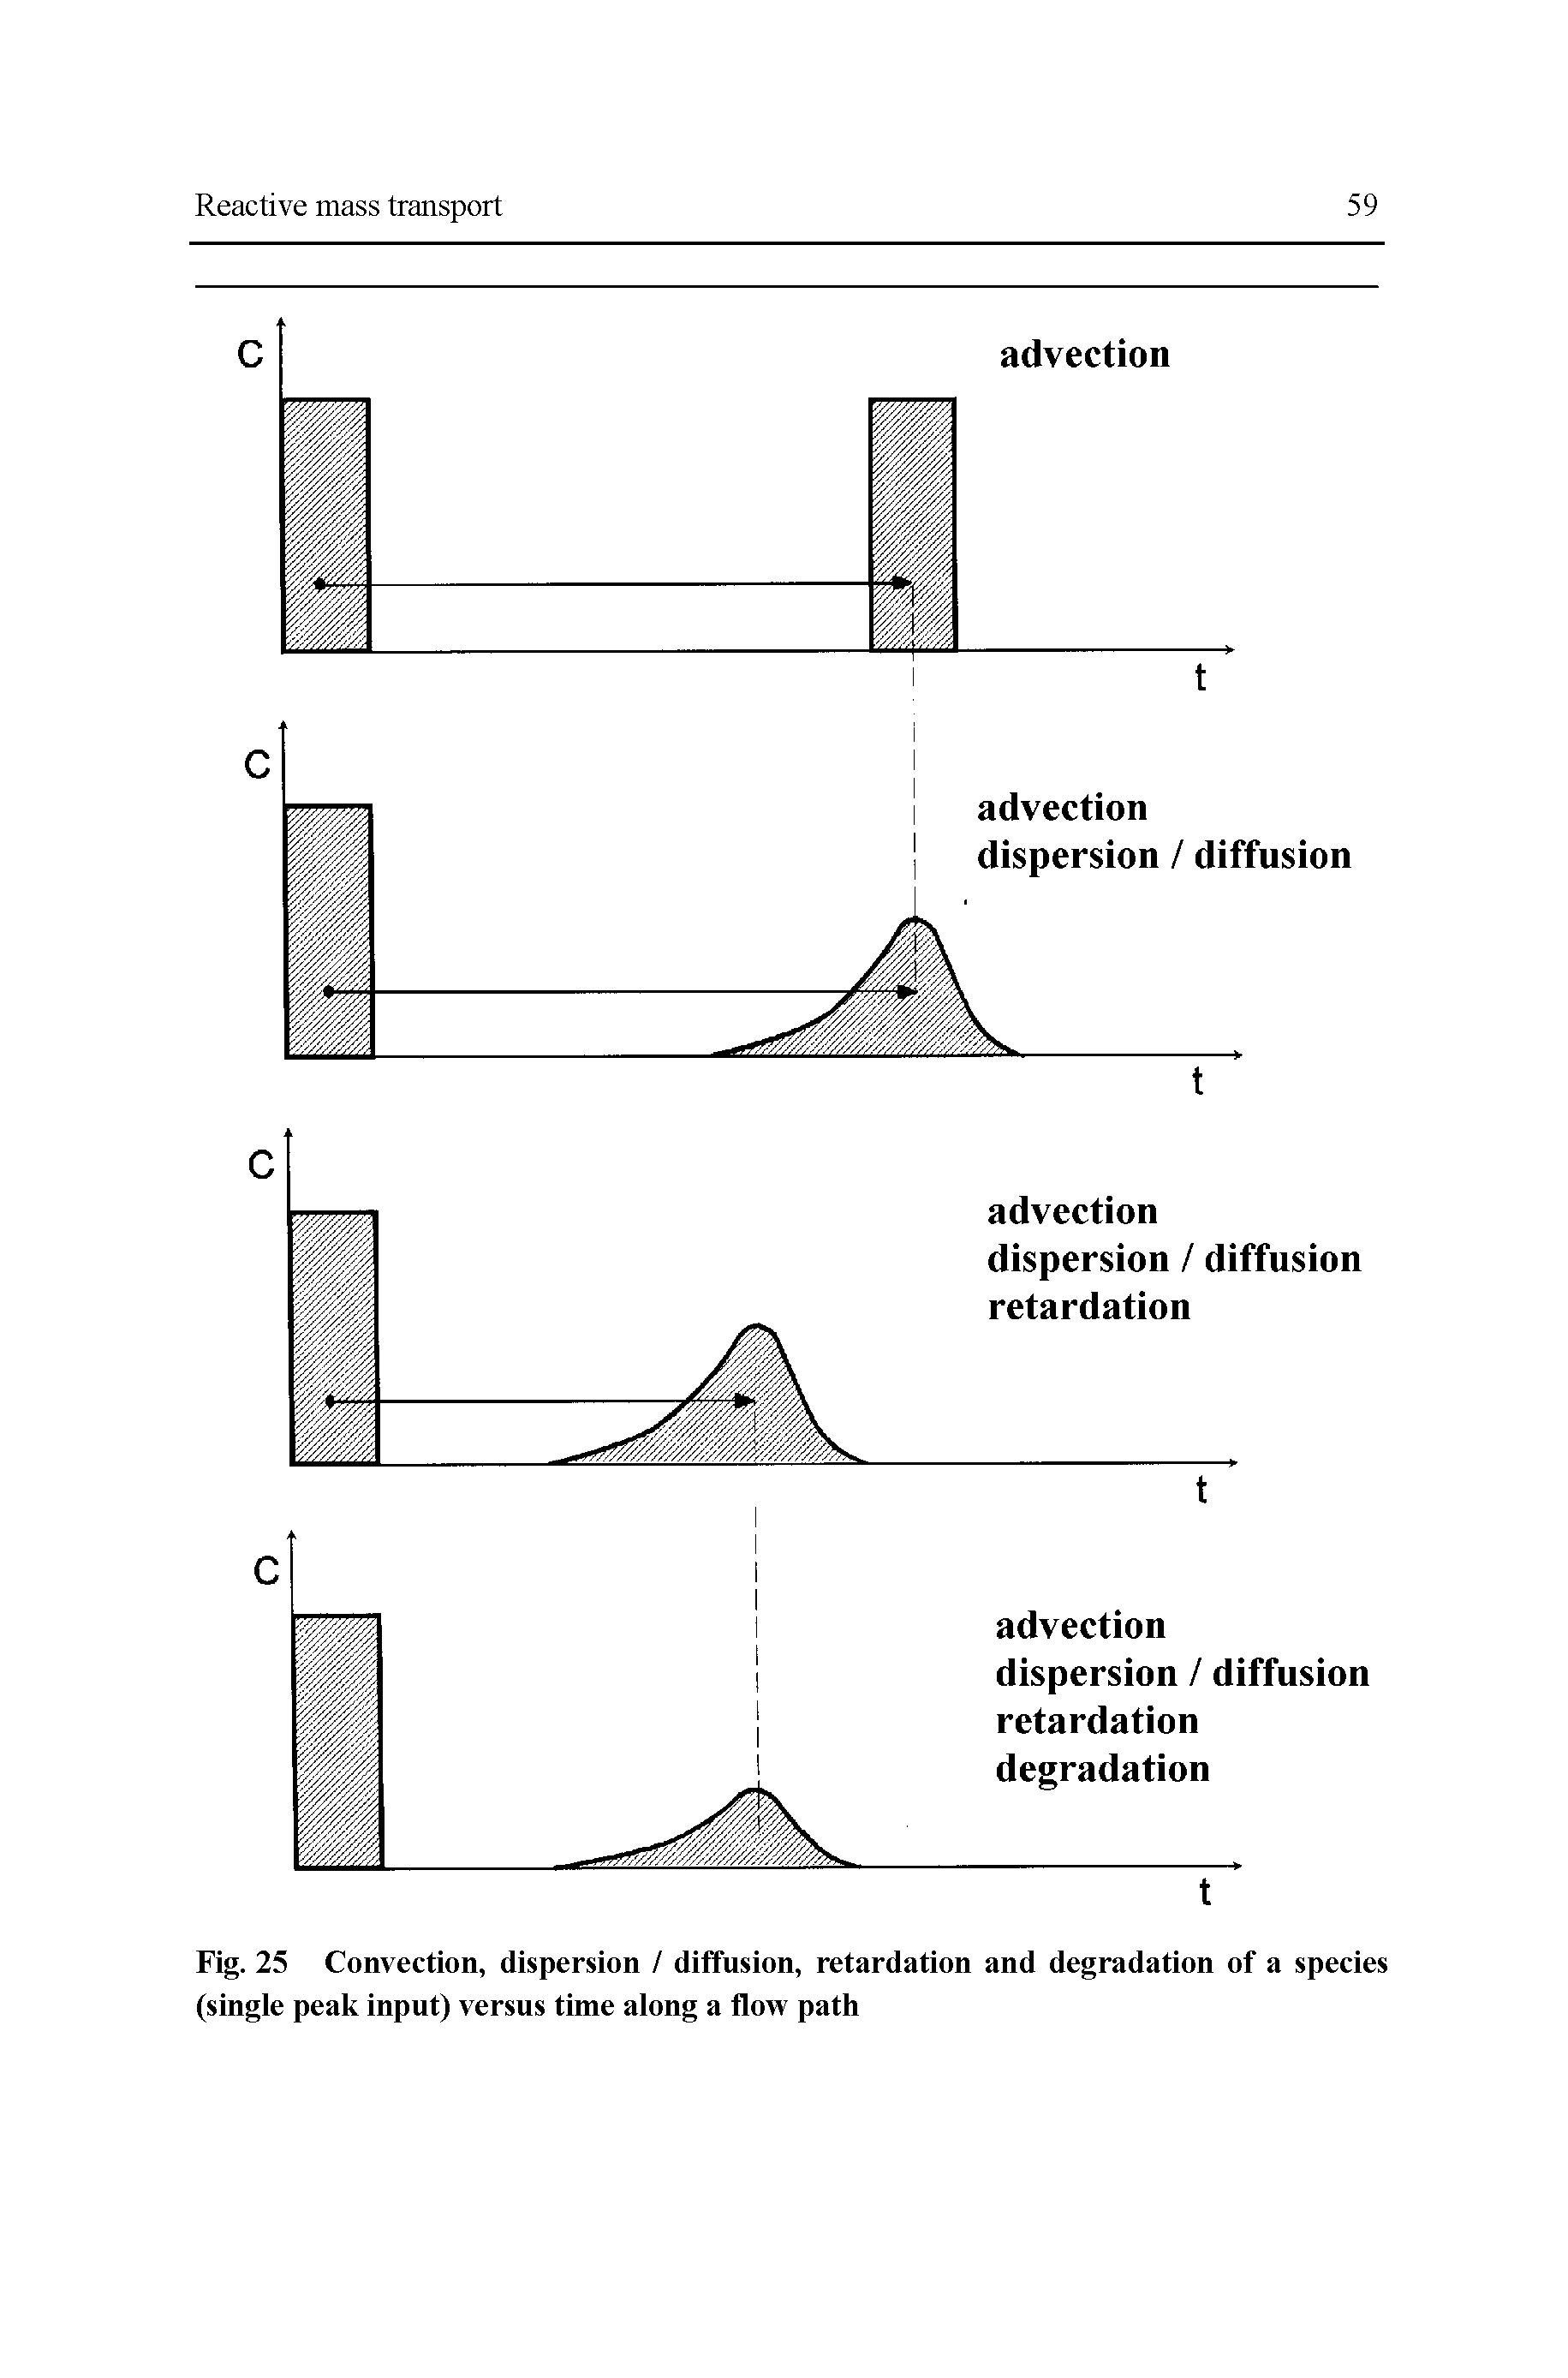 Fig. 25 Convection, dispersion / diffusion, retardation and degradation of a species (single peak input) versus time along a flow path...